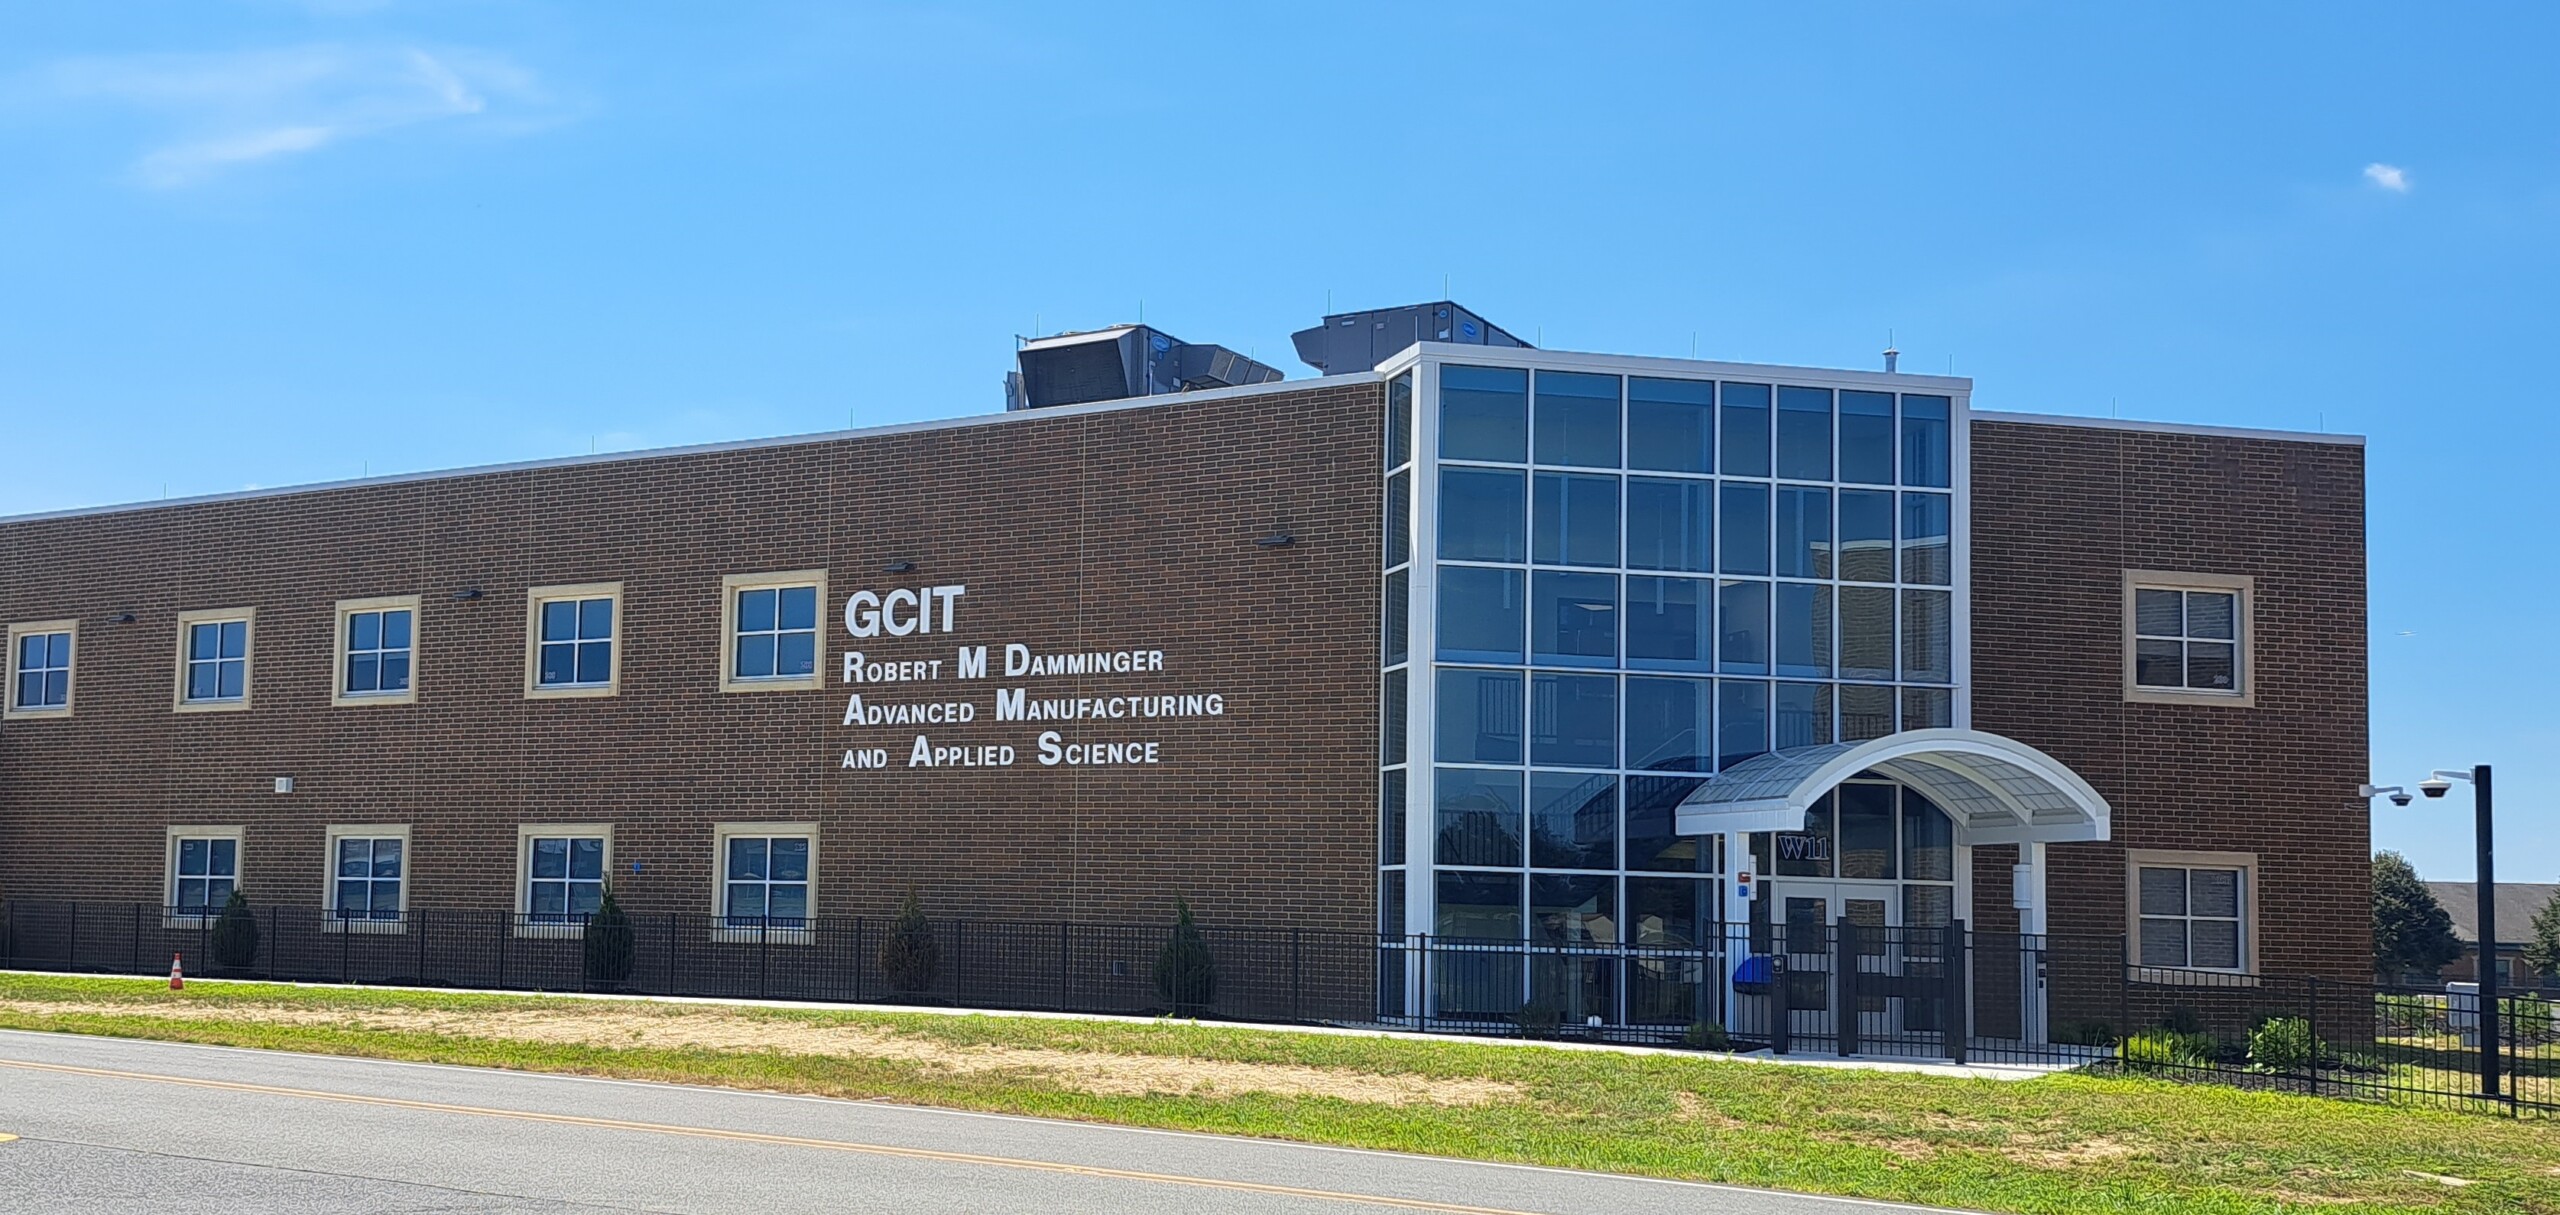 GCIT – Robert M. Damminger Advanced Manufacturing and Applied Science, Gloucester County, NJ